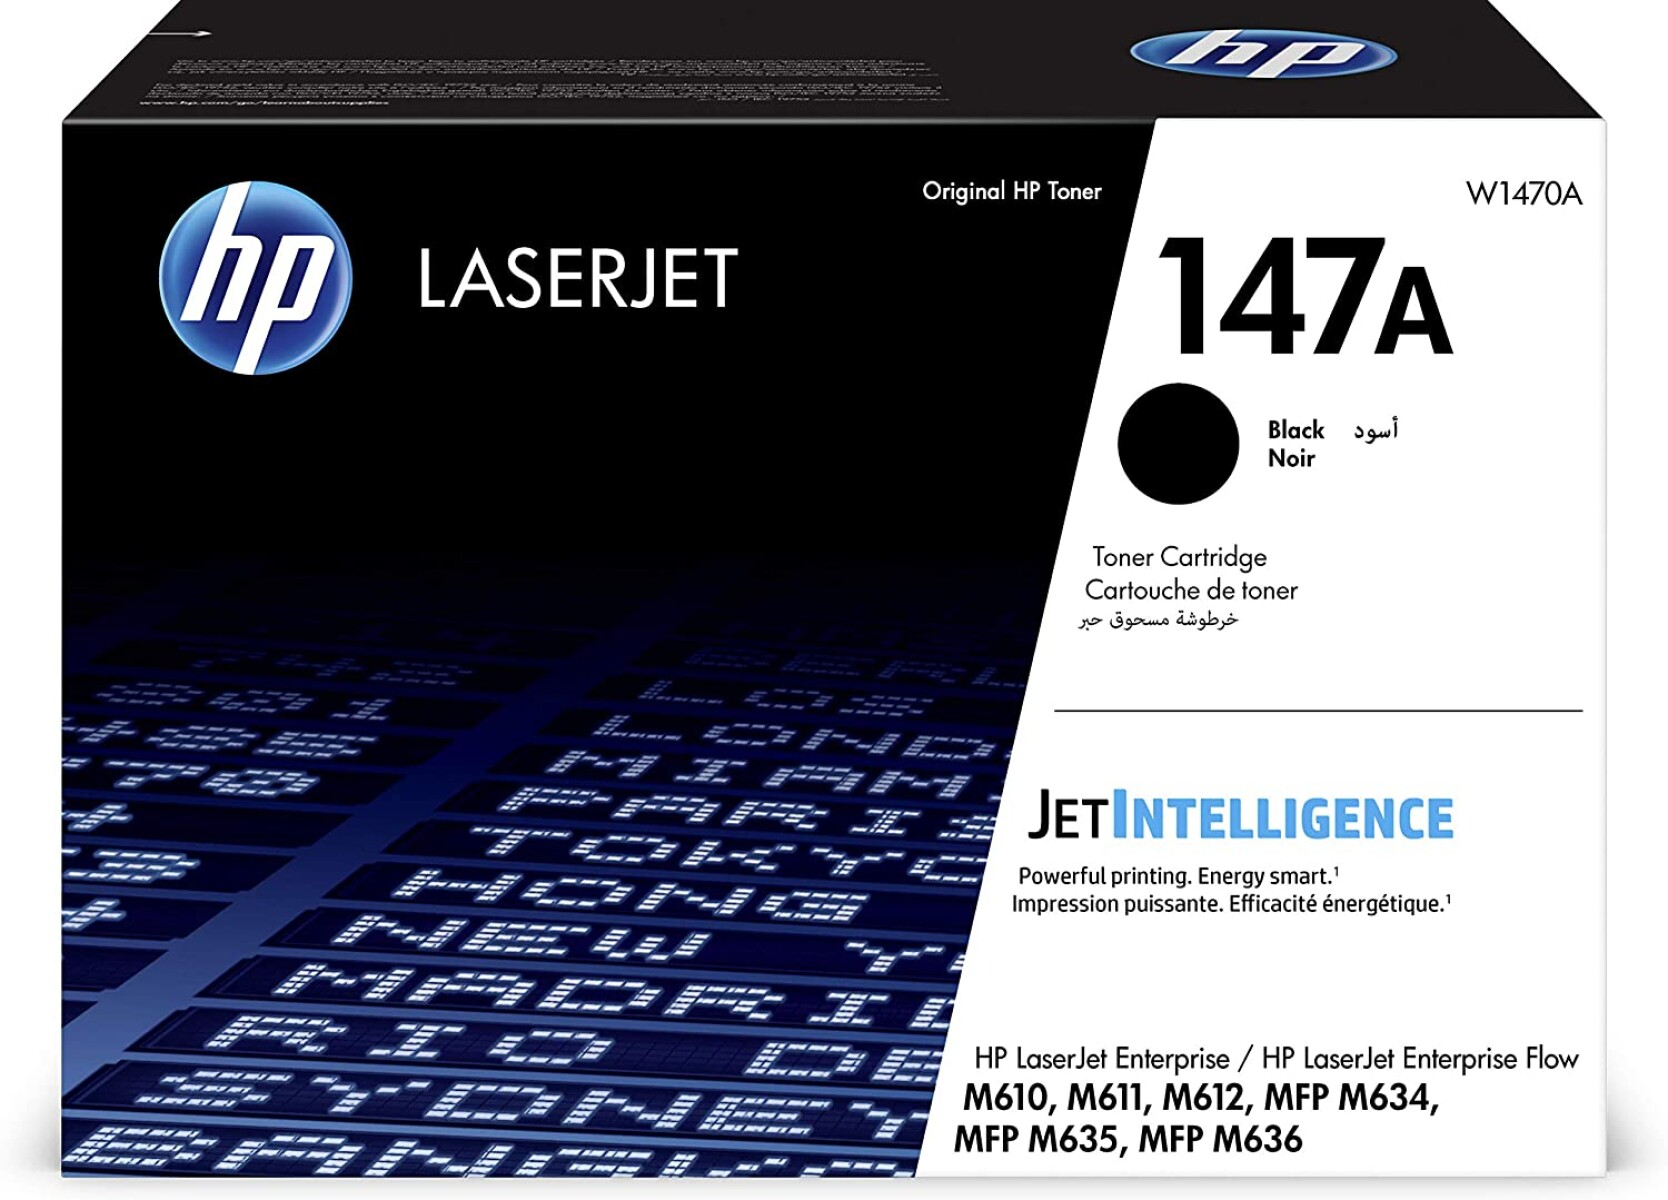 HP TONER W1470A 147A NEGRO M610/611/612/634/635 10.500CPS CP - Hp Toner W1470a 147a Negro M610/611/612/634/635 10.500cps Cp 